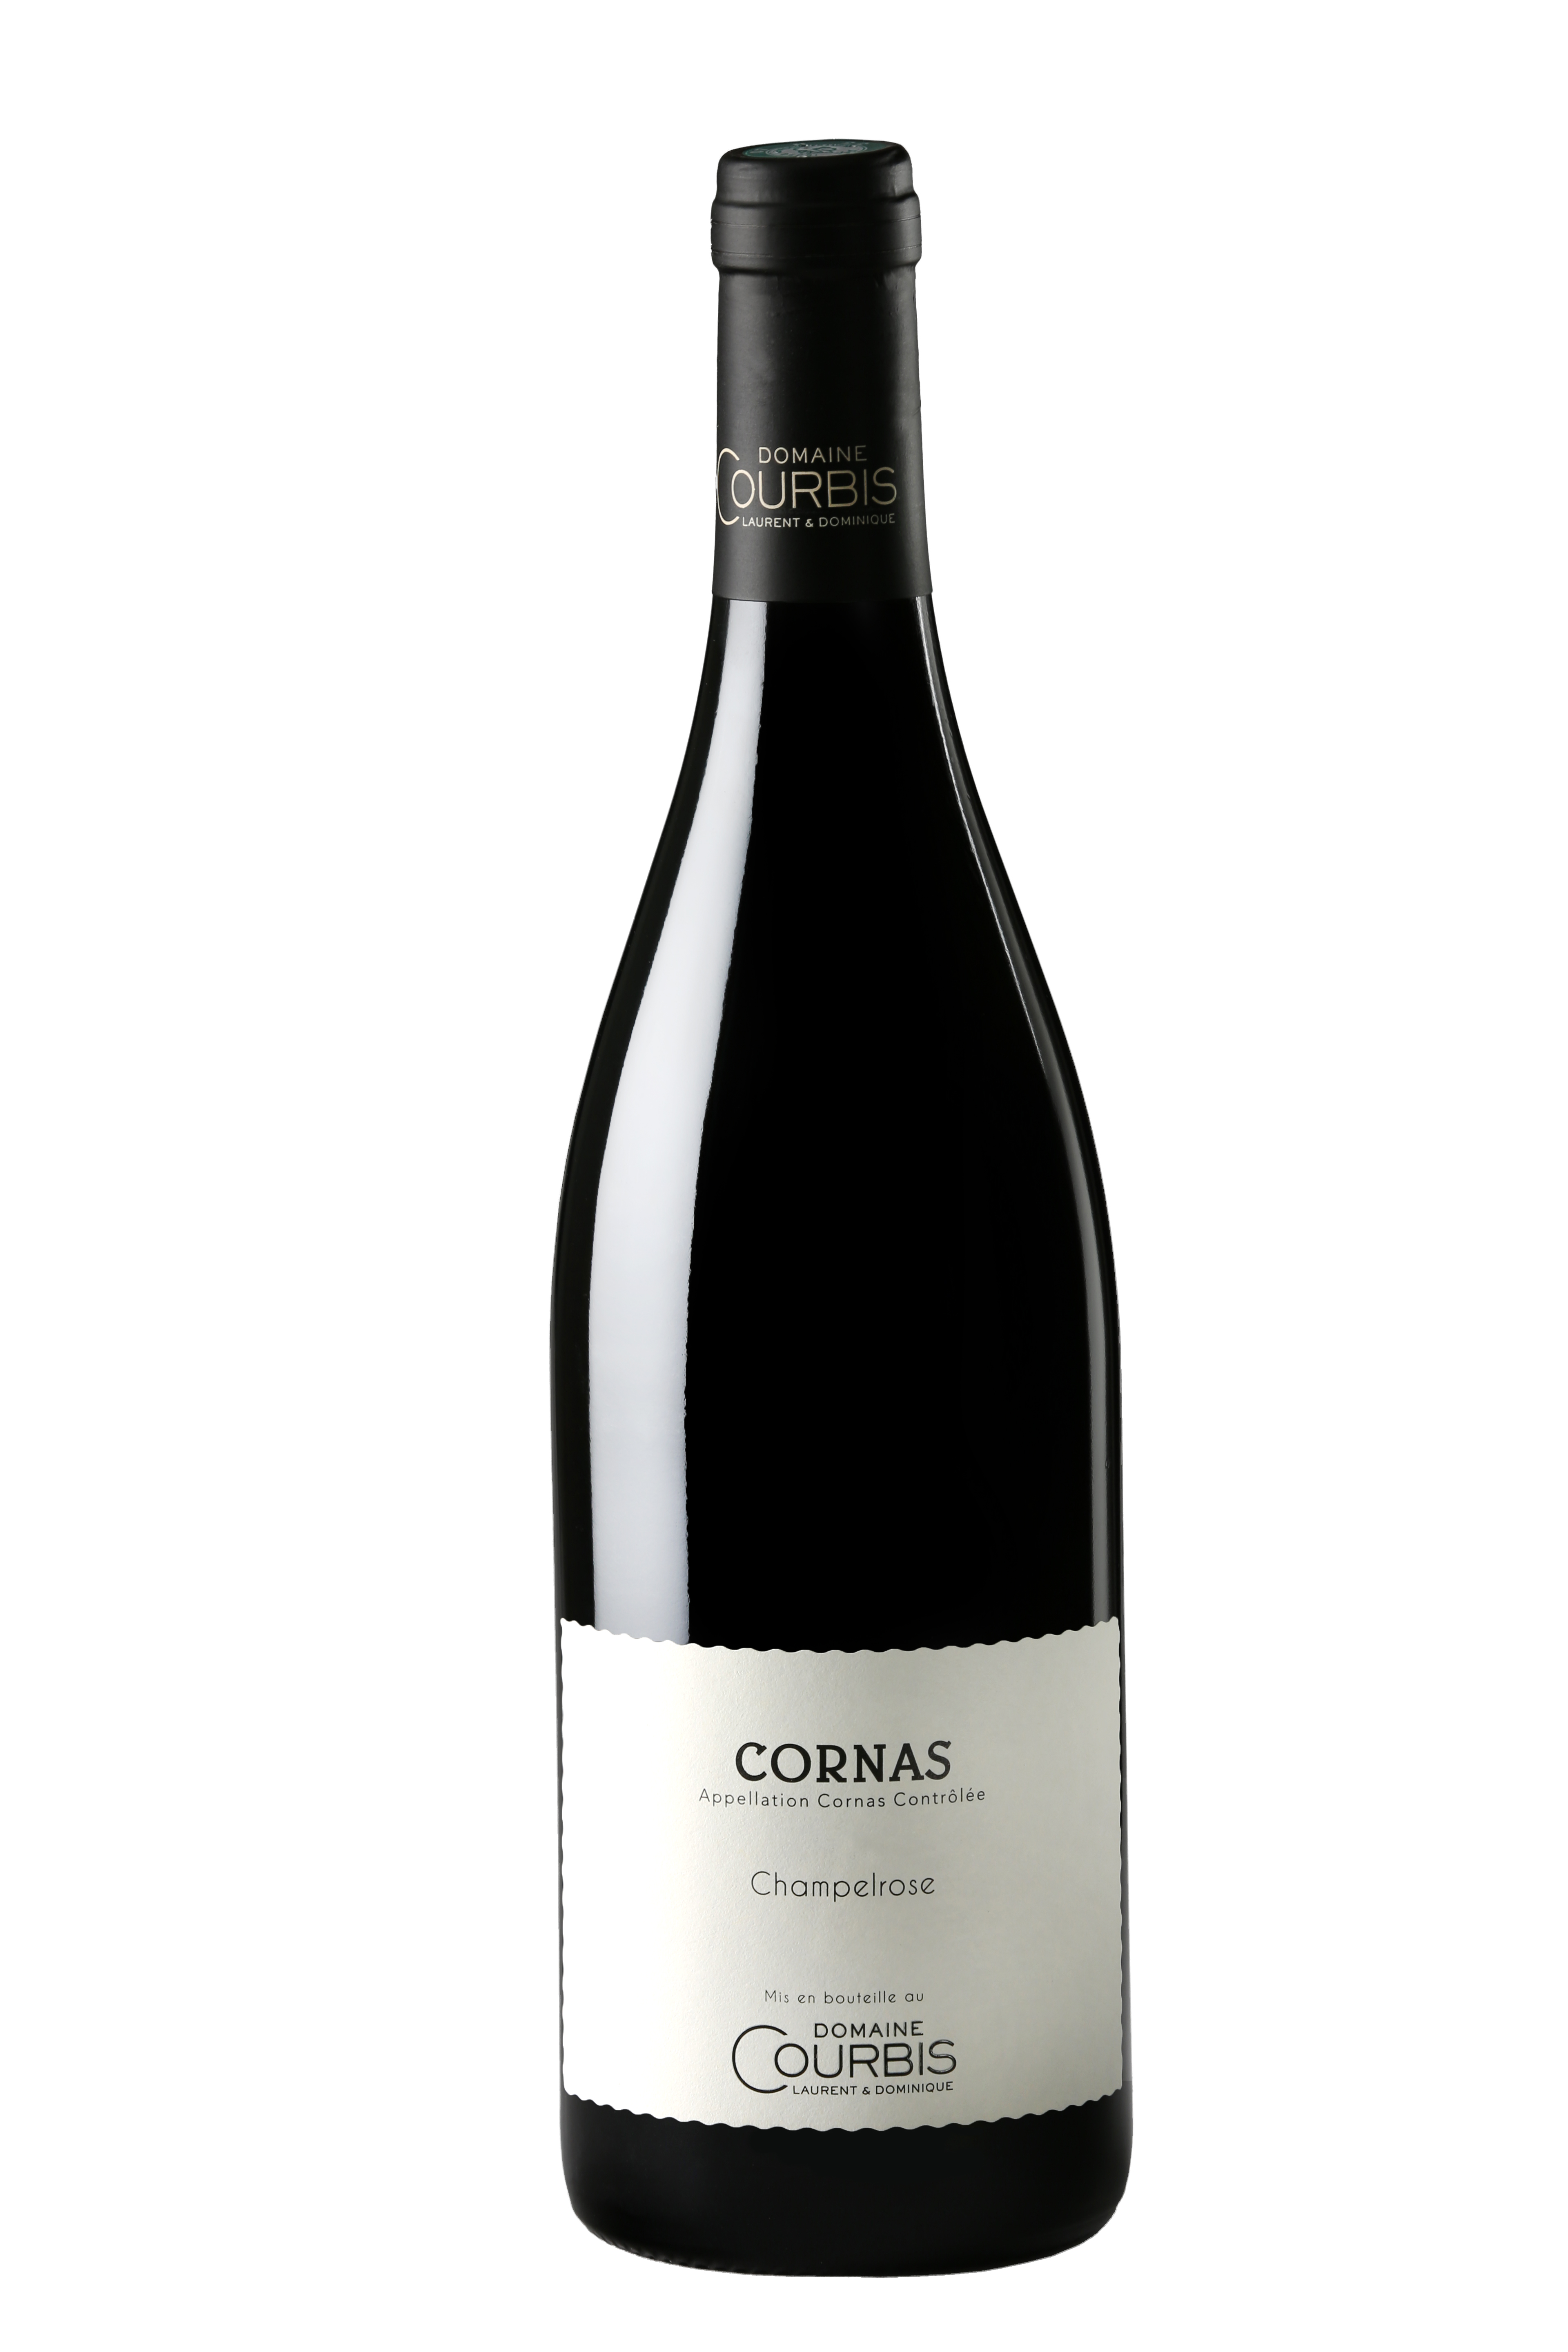 Domaine Courbis’ Cornas Champelrose 2018 is the perfect red wine to warm up winter